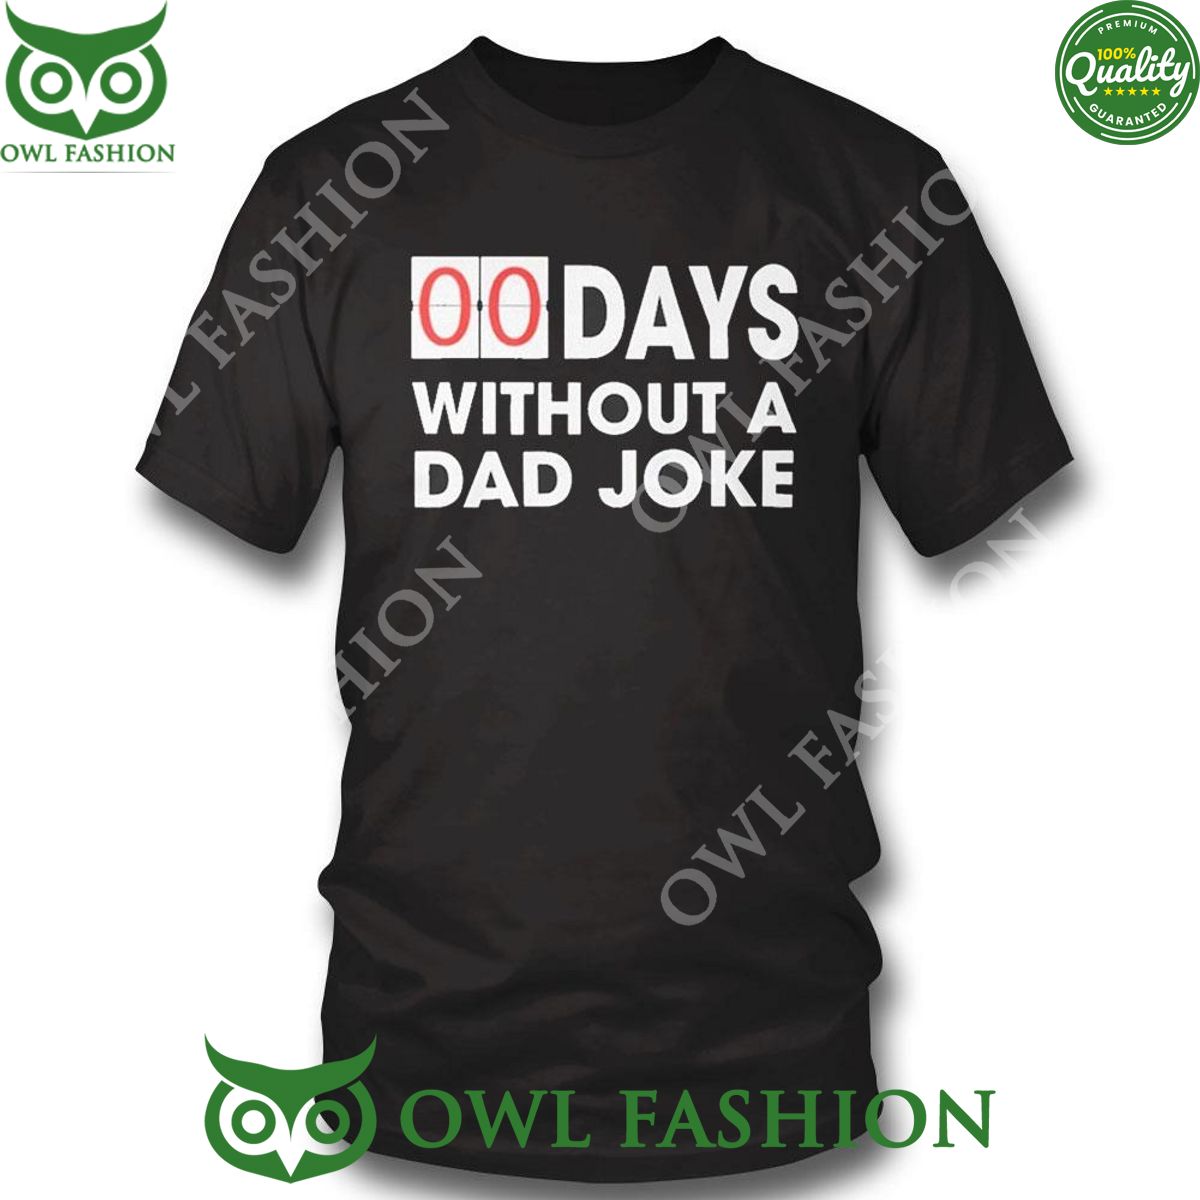 00 Days Without A Dad Joke 2024 t shirt Cool look bro